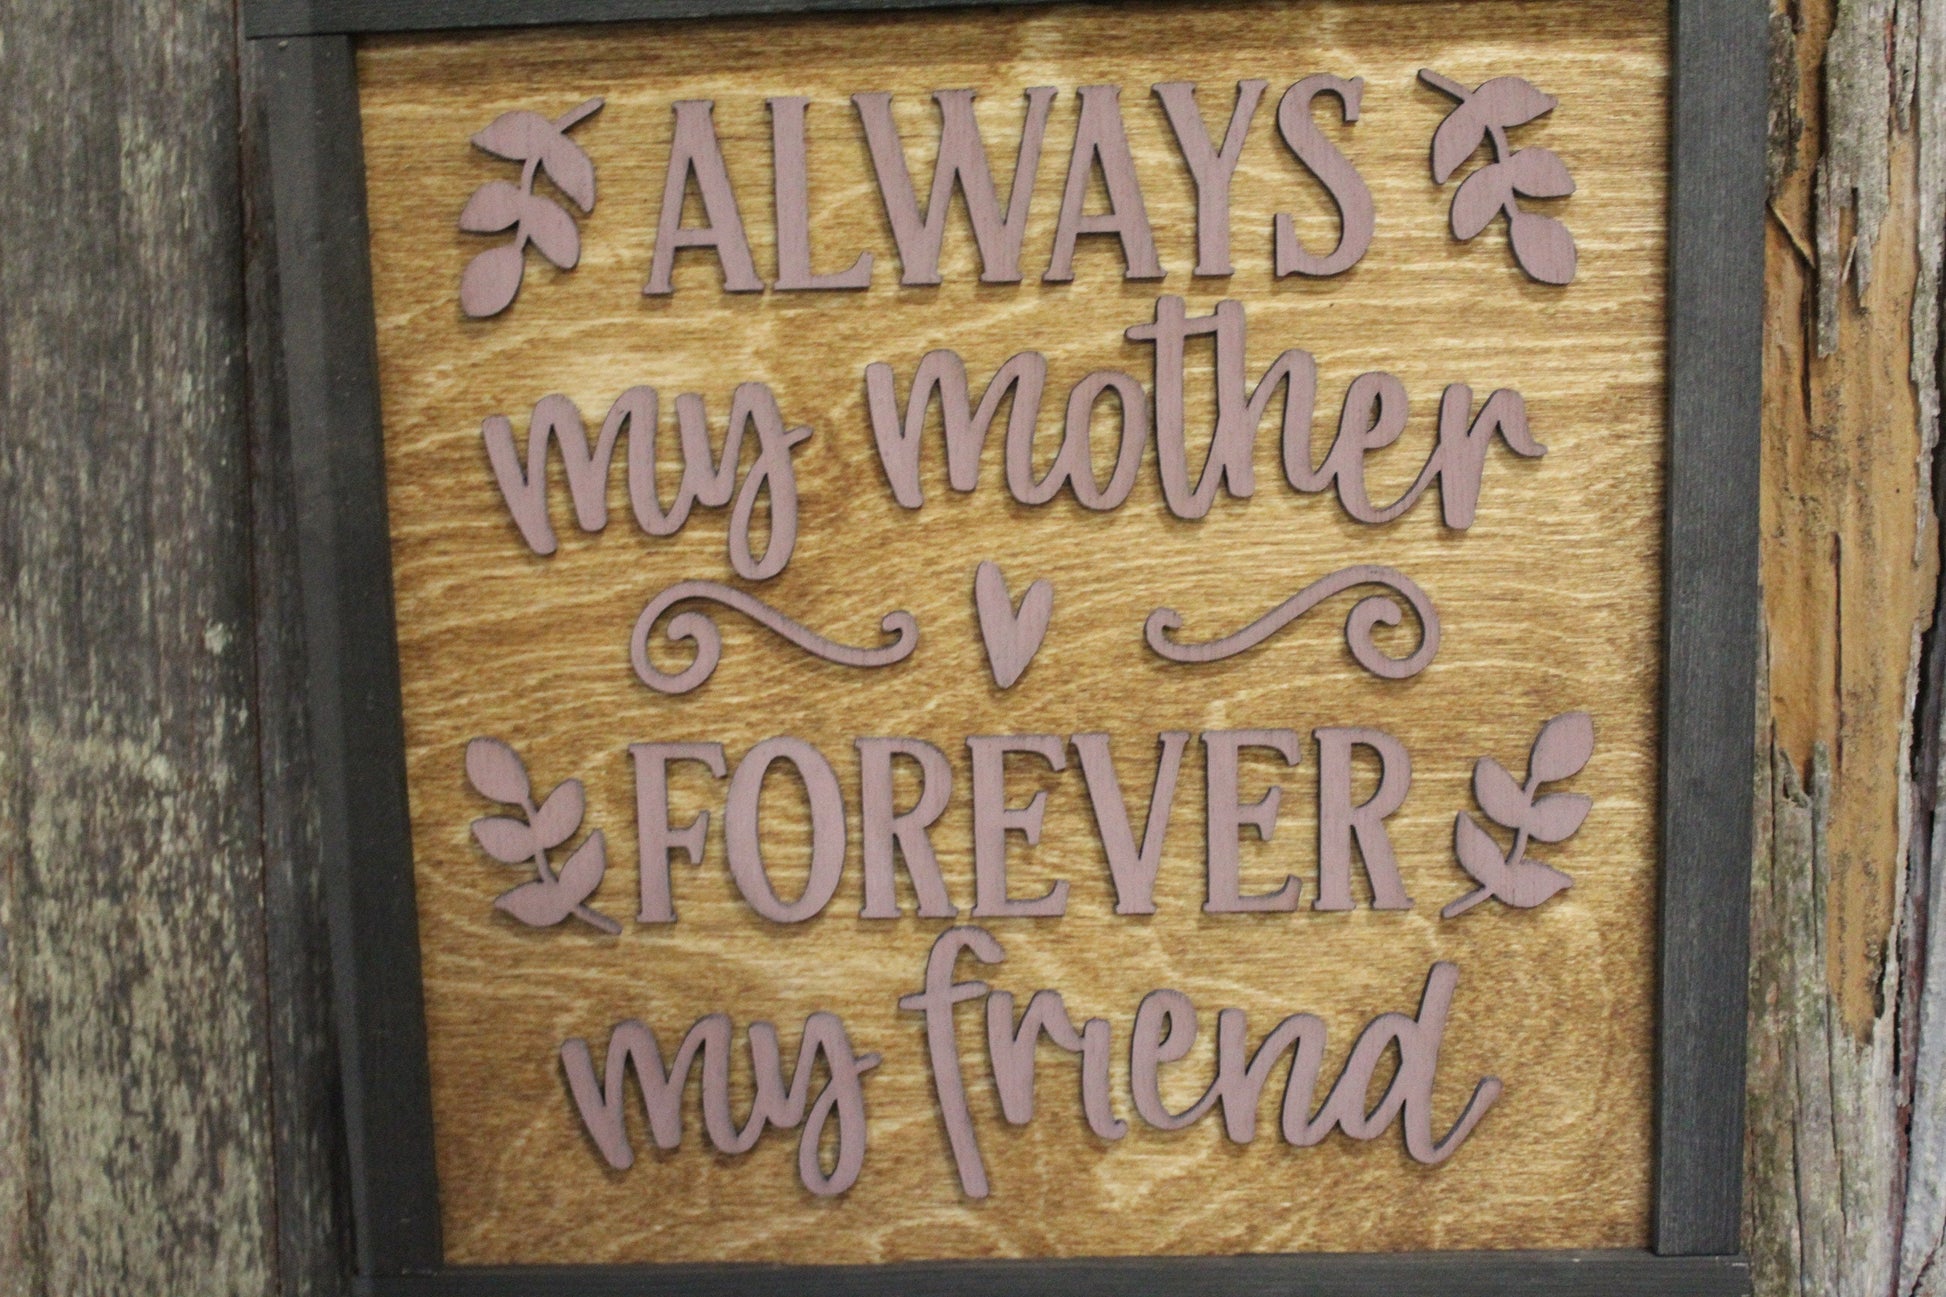 Mothers Day Gift Always My Mother Forever My Friend Mom Saying Wood Sign Primitive Rustic Wall Decoration Raised Text Script Framed Art